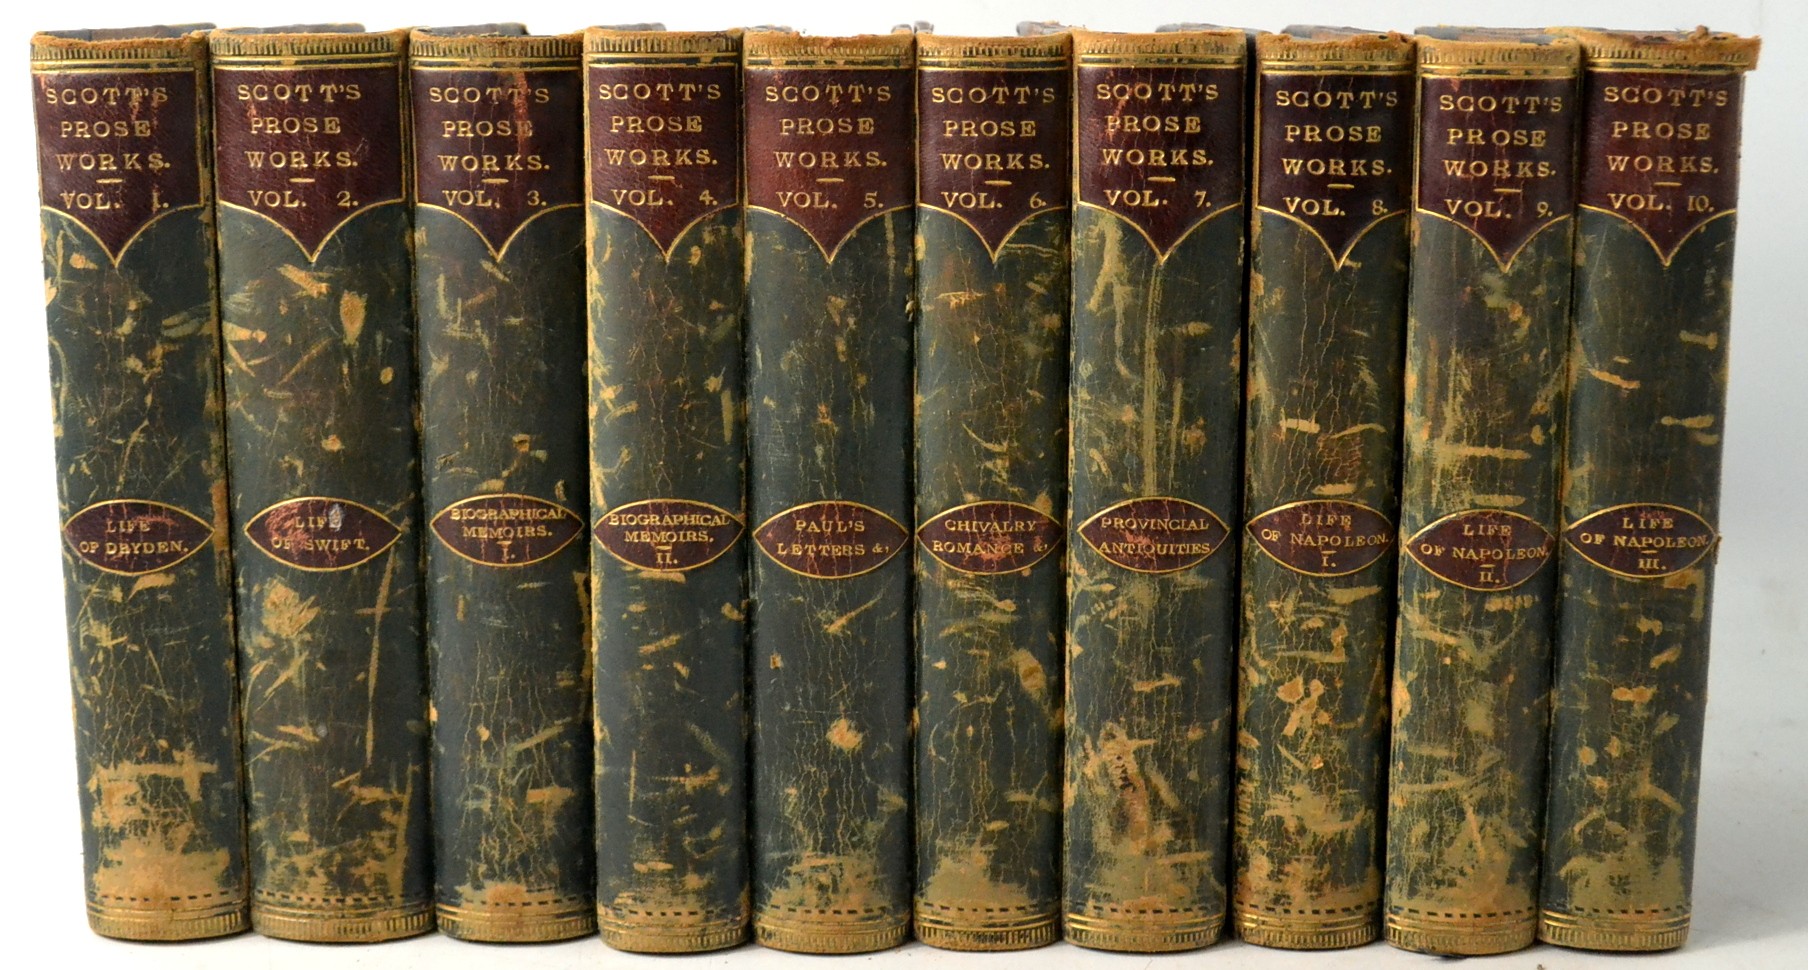 RARE Miscellaneous prose works by Sir Walter Scott (30 volumes) - Image 7 of 13